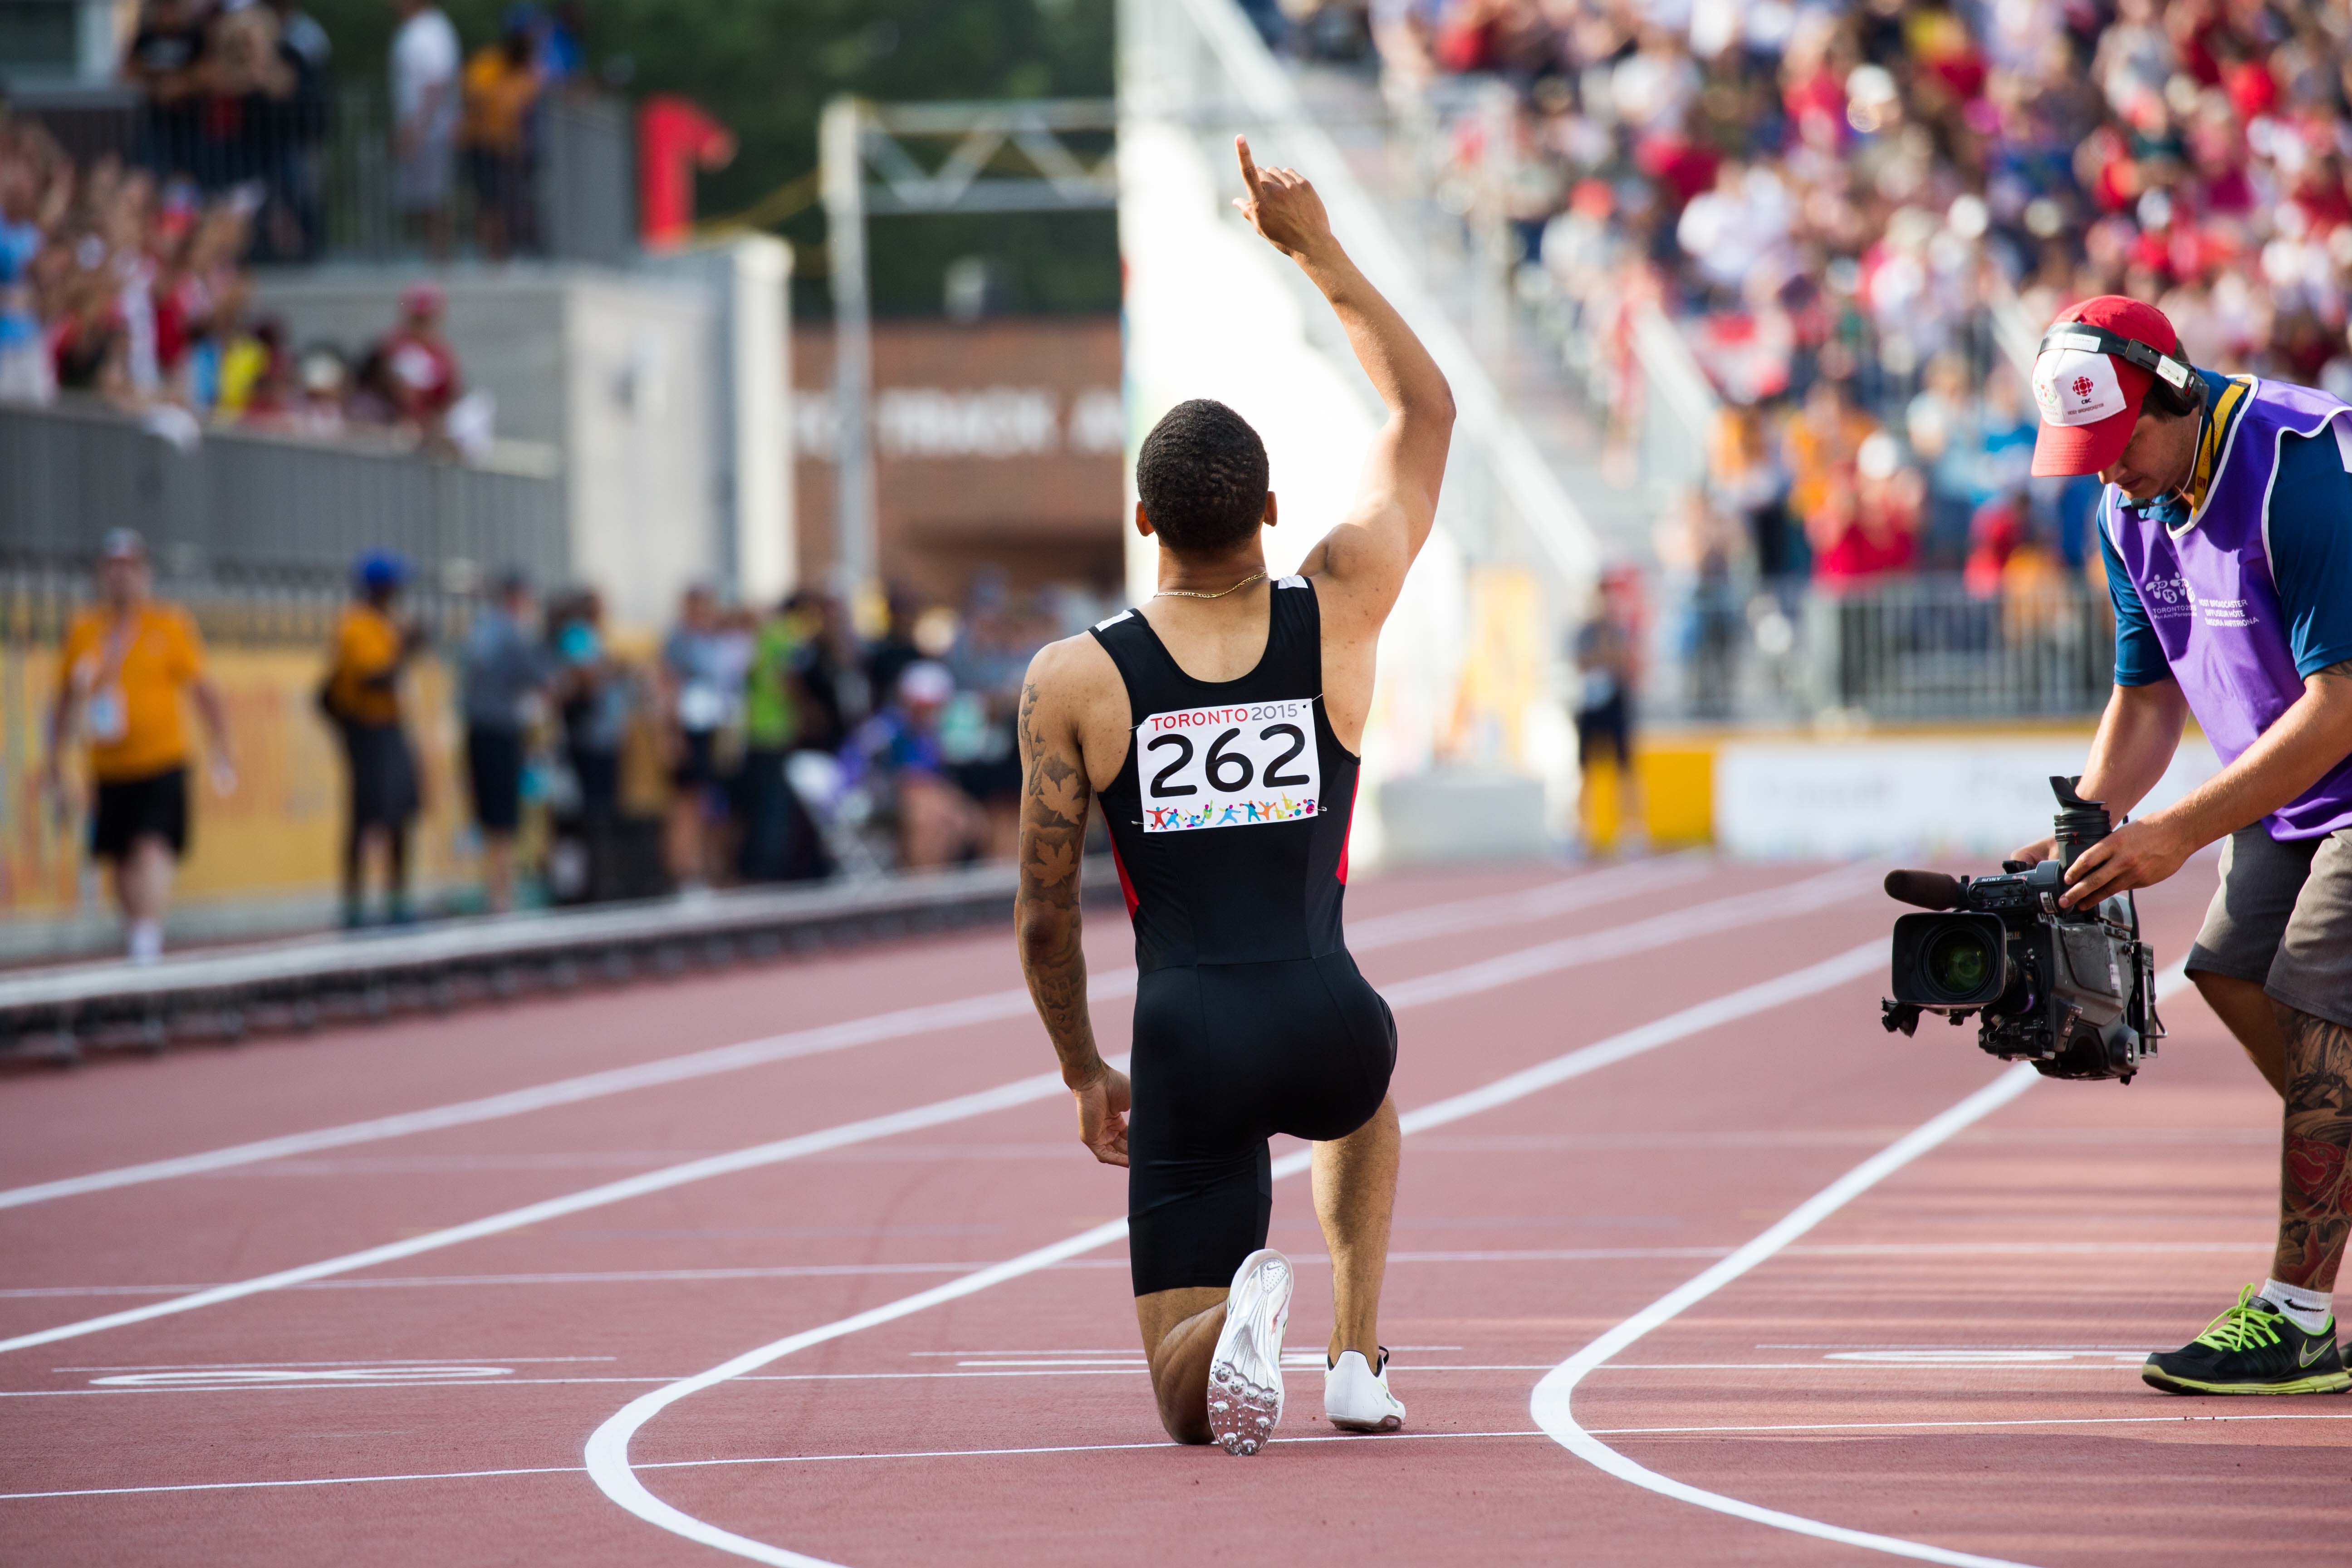 Andre De Grasse celebrates after winning the men's 200m at the Pan American Games